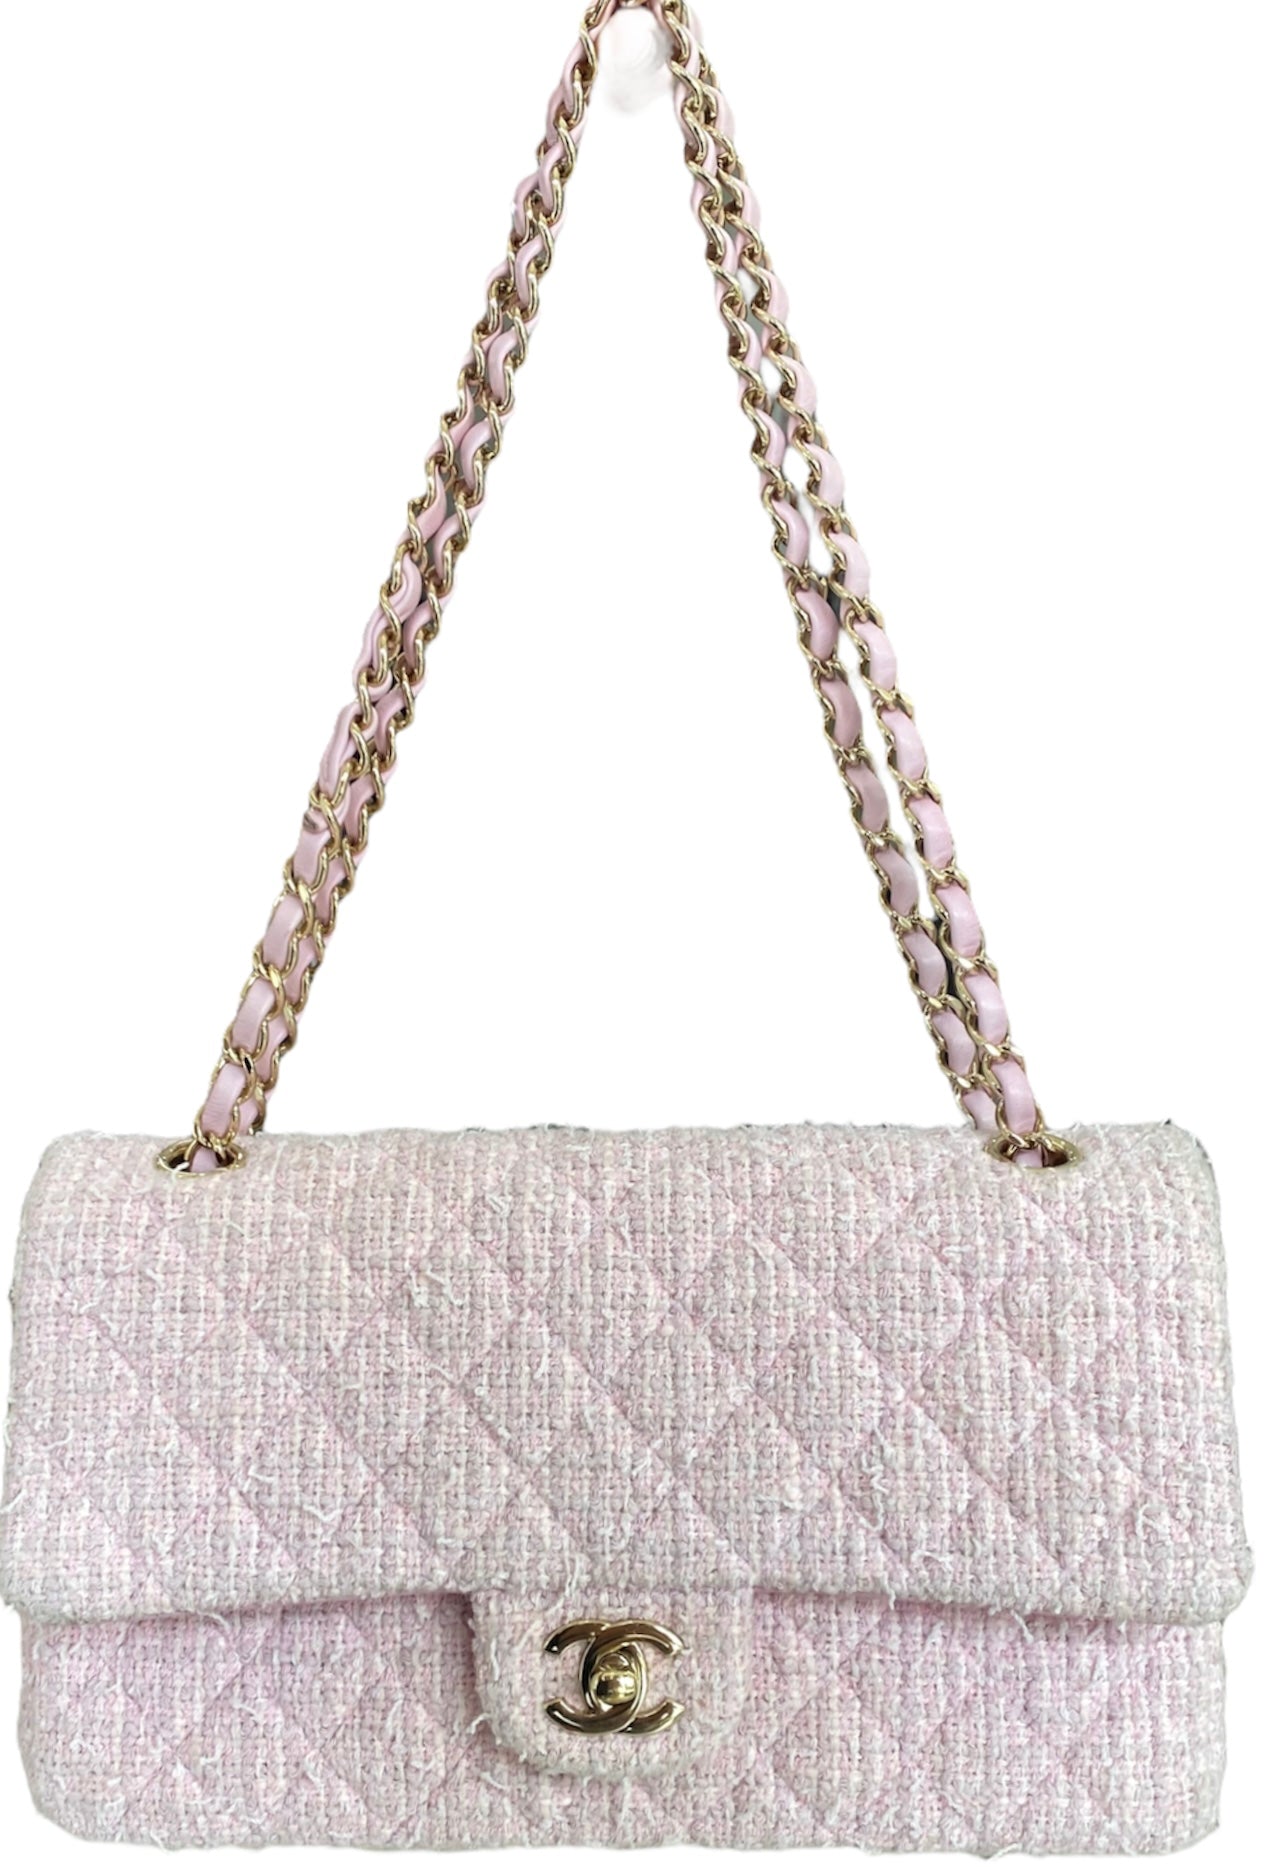 Chanel Limited Edition Pink Bag